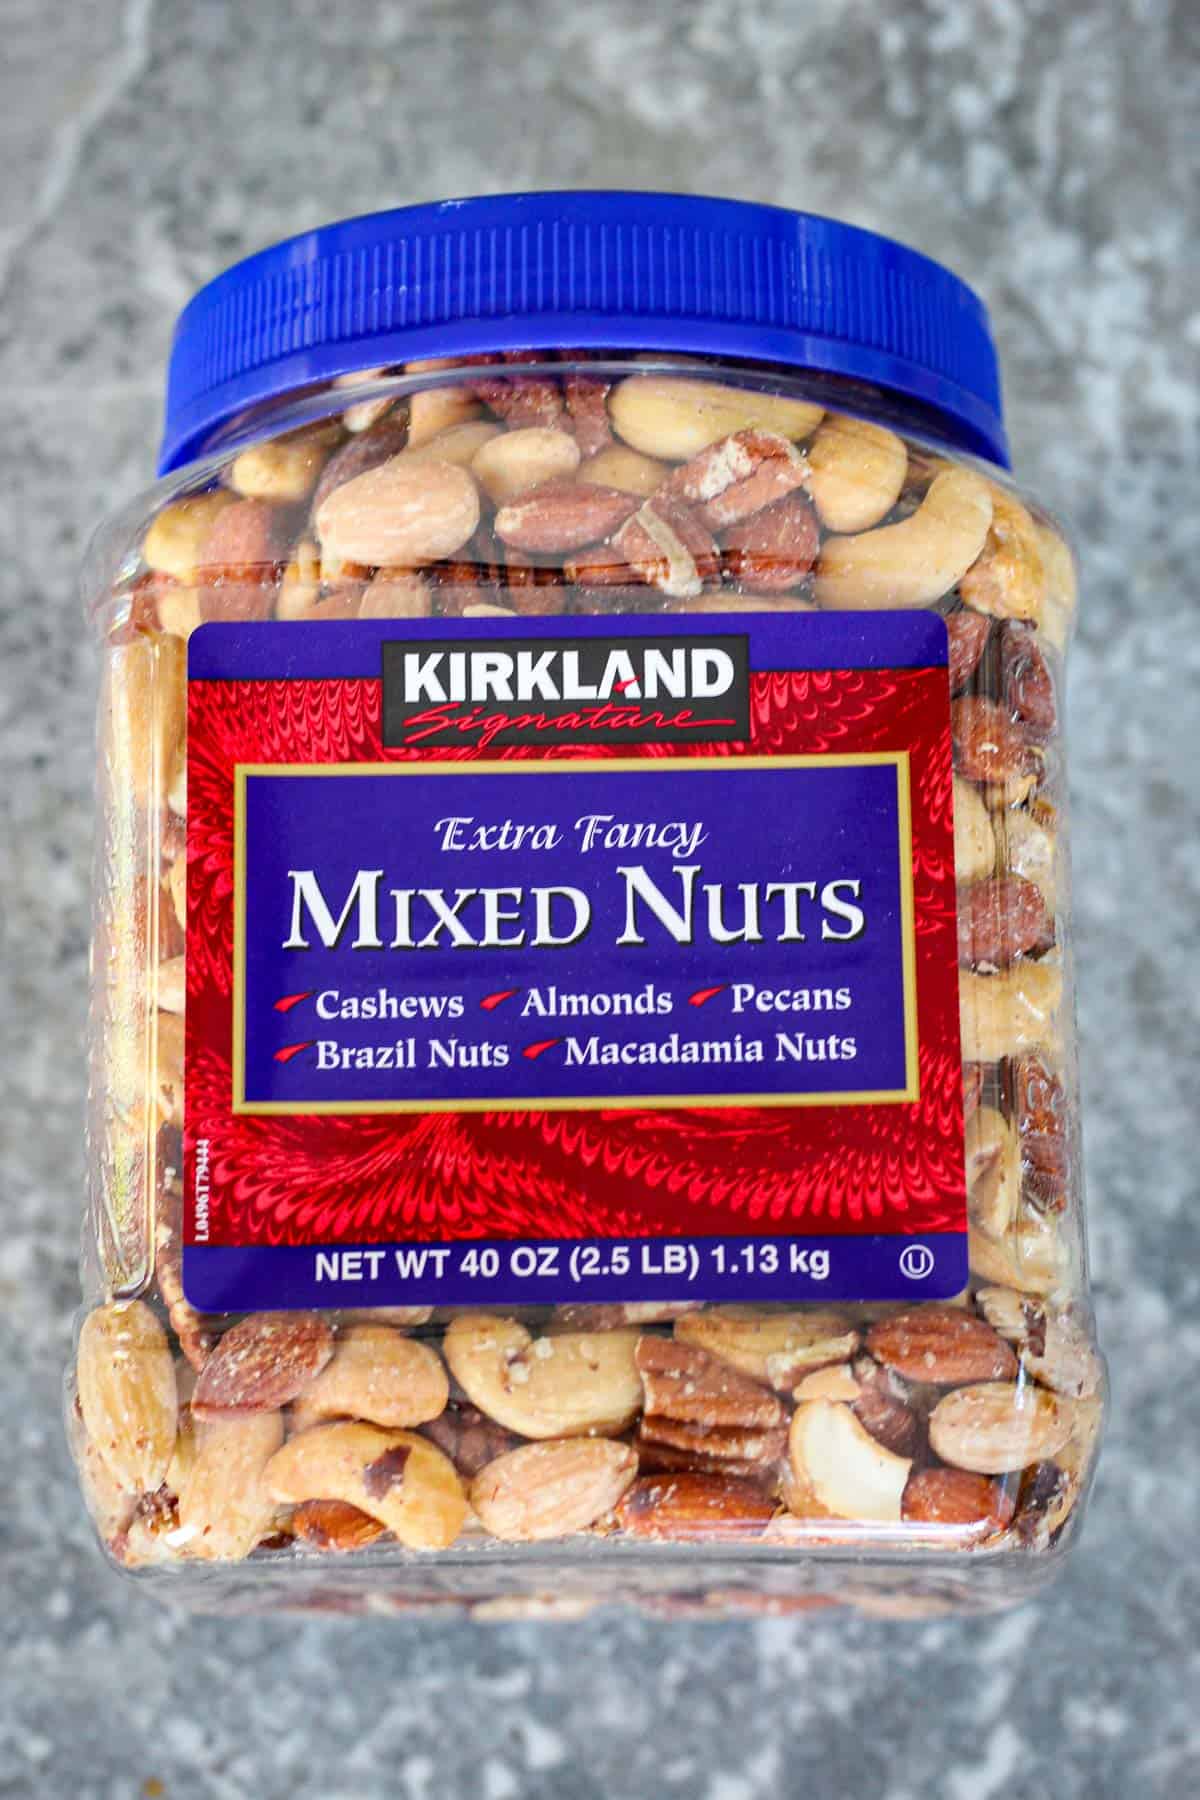 A container of mixed nuts, about 2.5 lbs. 